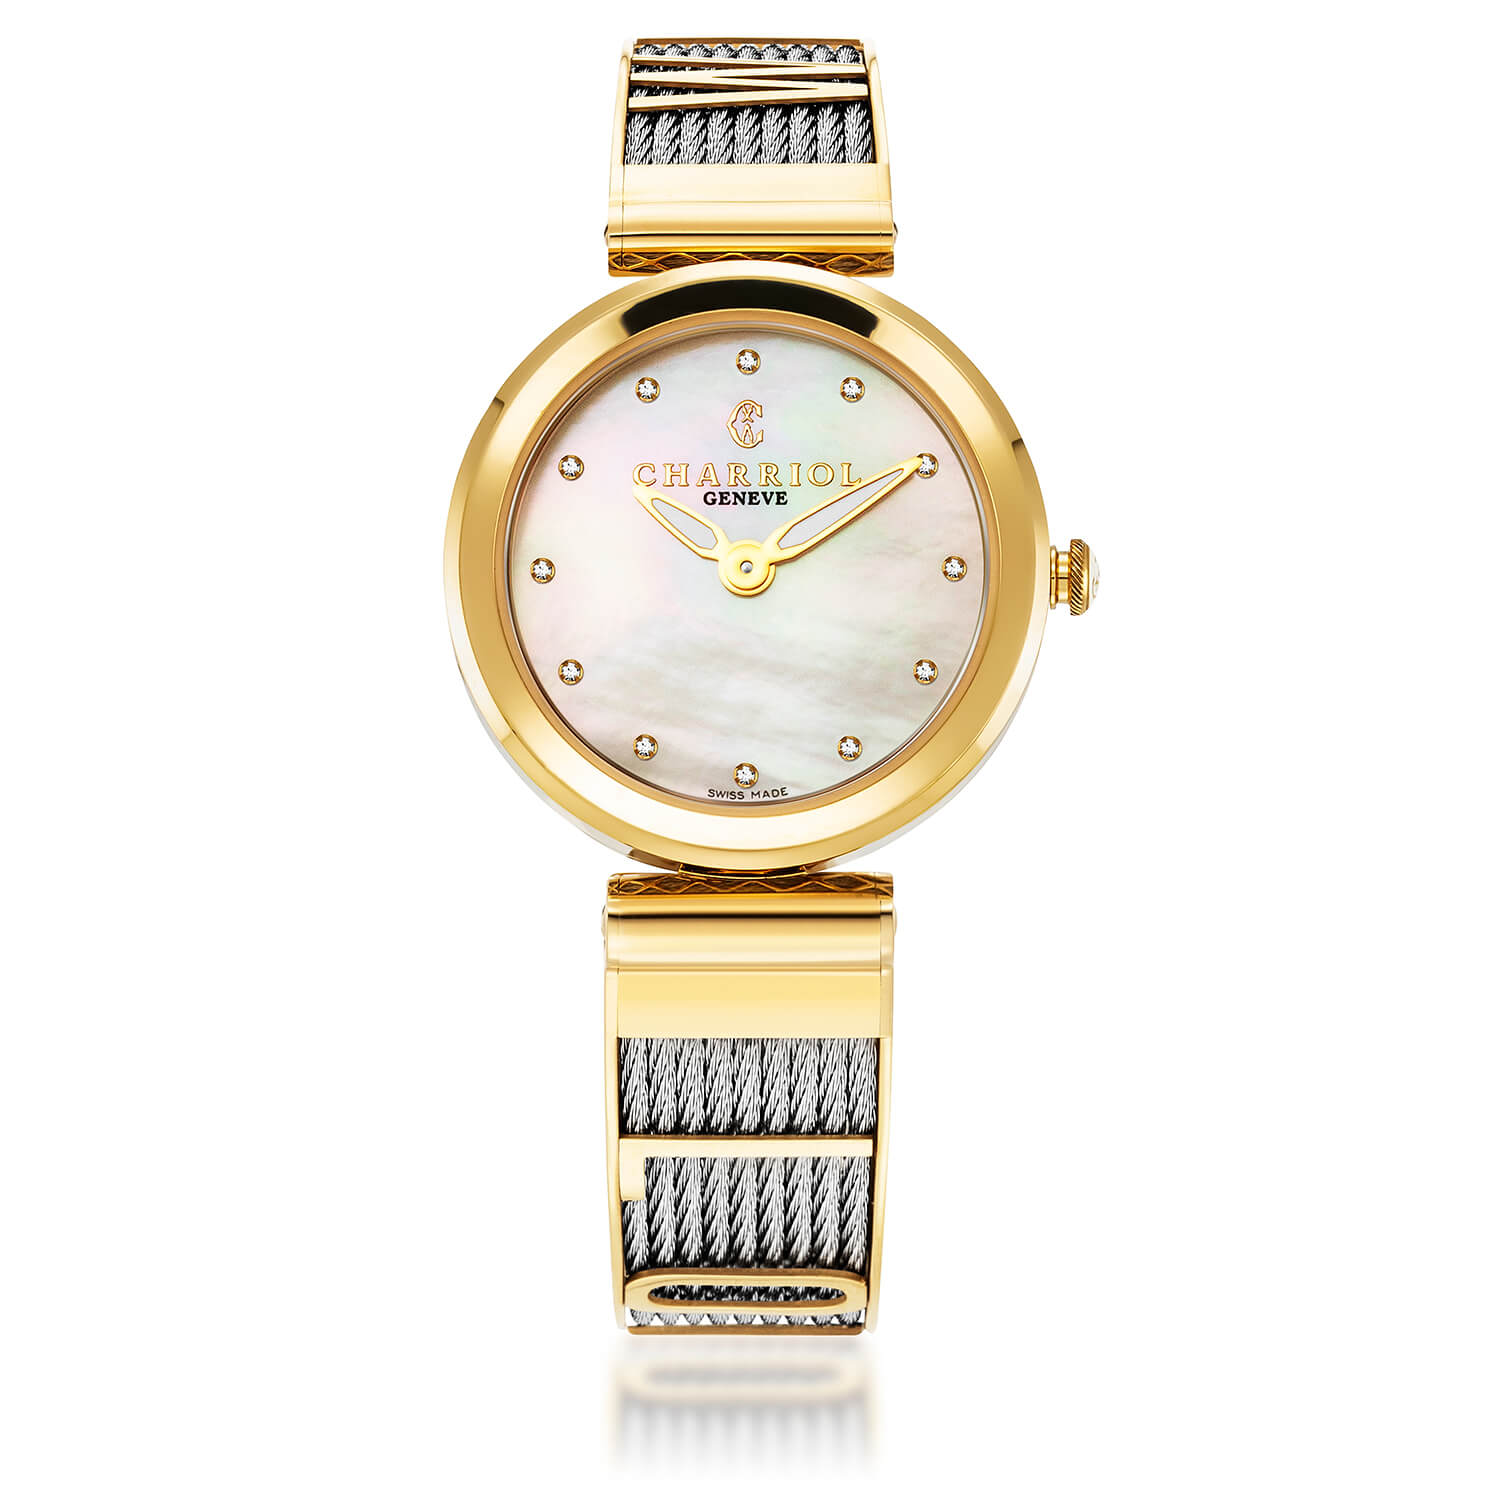 FOREVER YOURS, 32MM, QUARTZ CALIBRE, MOTHER-OF-PEARL WITH 12 DIAMONDS DIAL, YELLOW GOLD PVD BEZEL, STEEL CABLE BRACELET - Charriol Geneve -  Watch